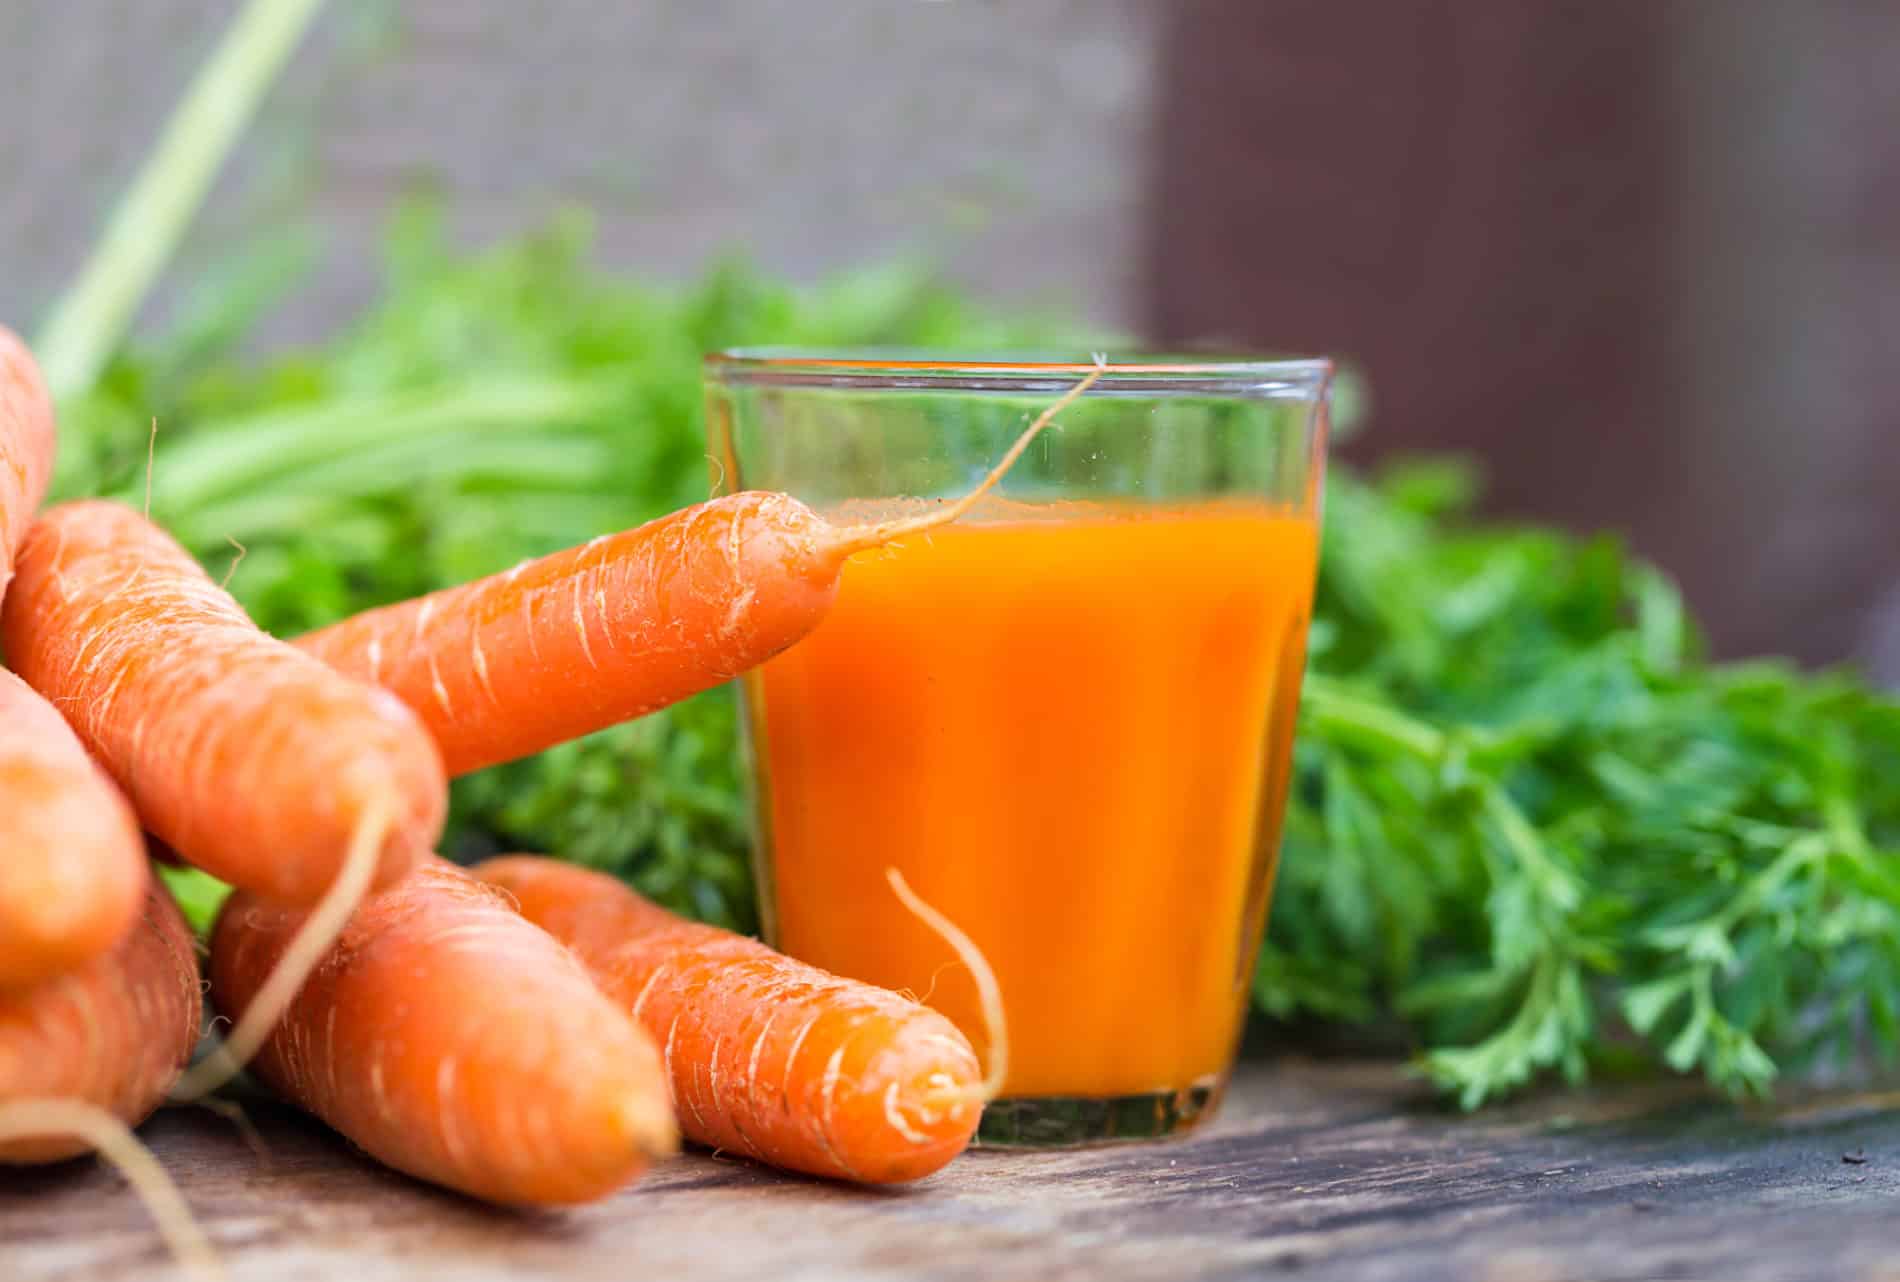 How Do You Make Carrot Juice Step By Step In Mempawah City